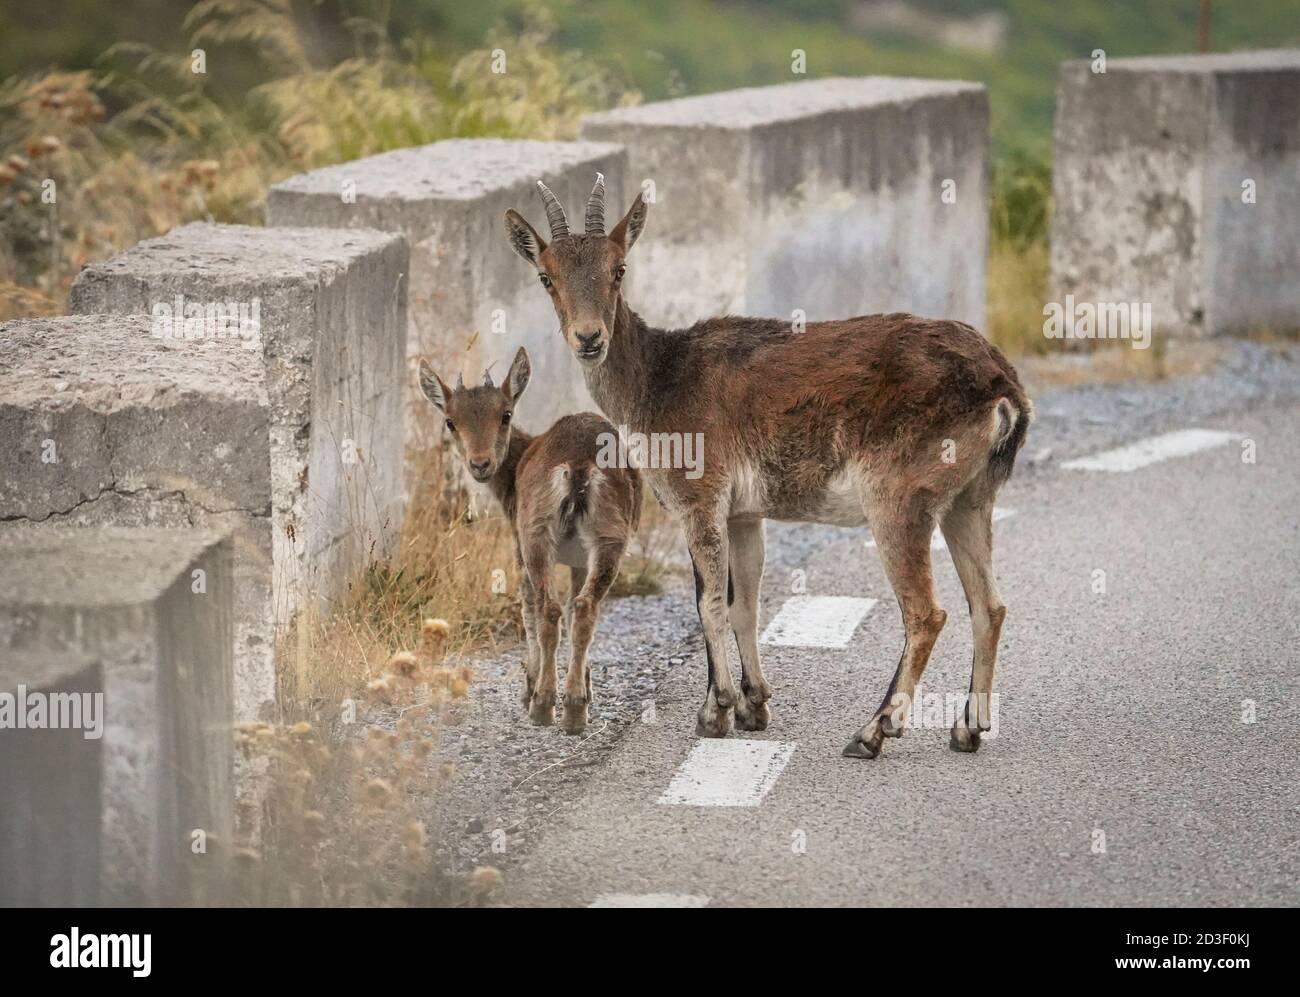 Spanish ibex, Spanish wild goat, or Iberian wild goat (Capra pyrenaica), with young, crossing a mountain road, Andalucia, Spain. Stock Photo